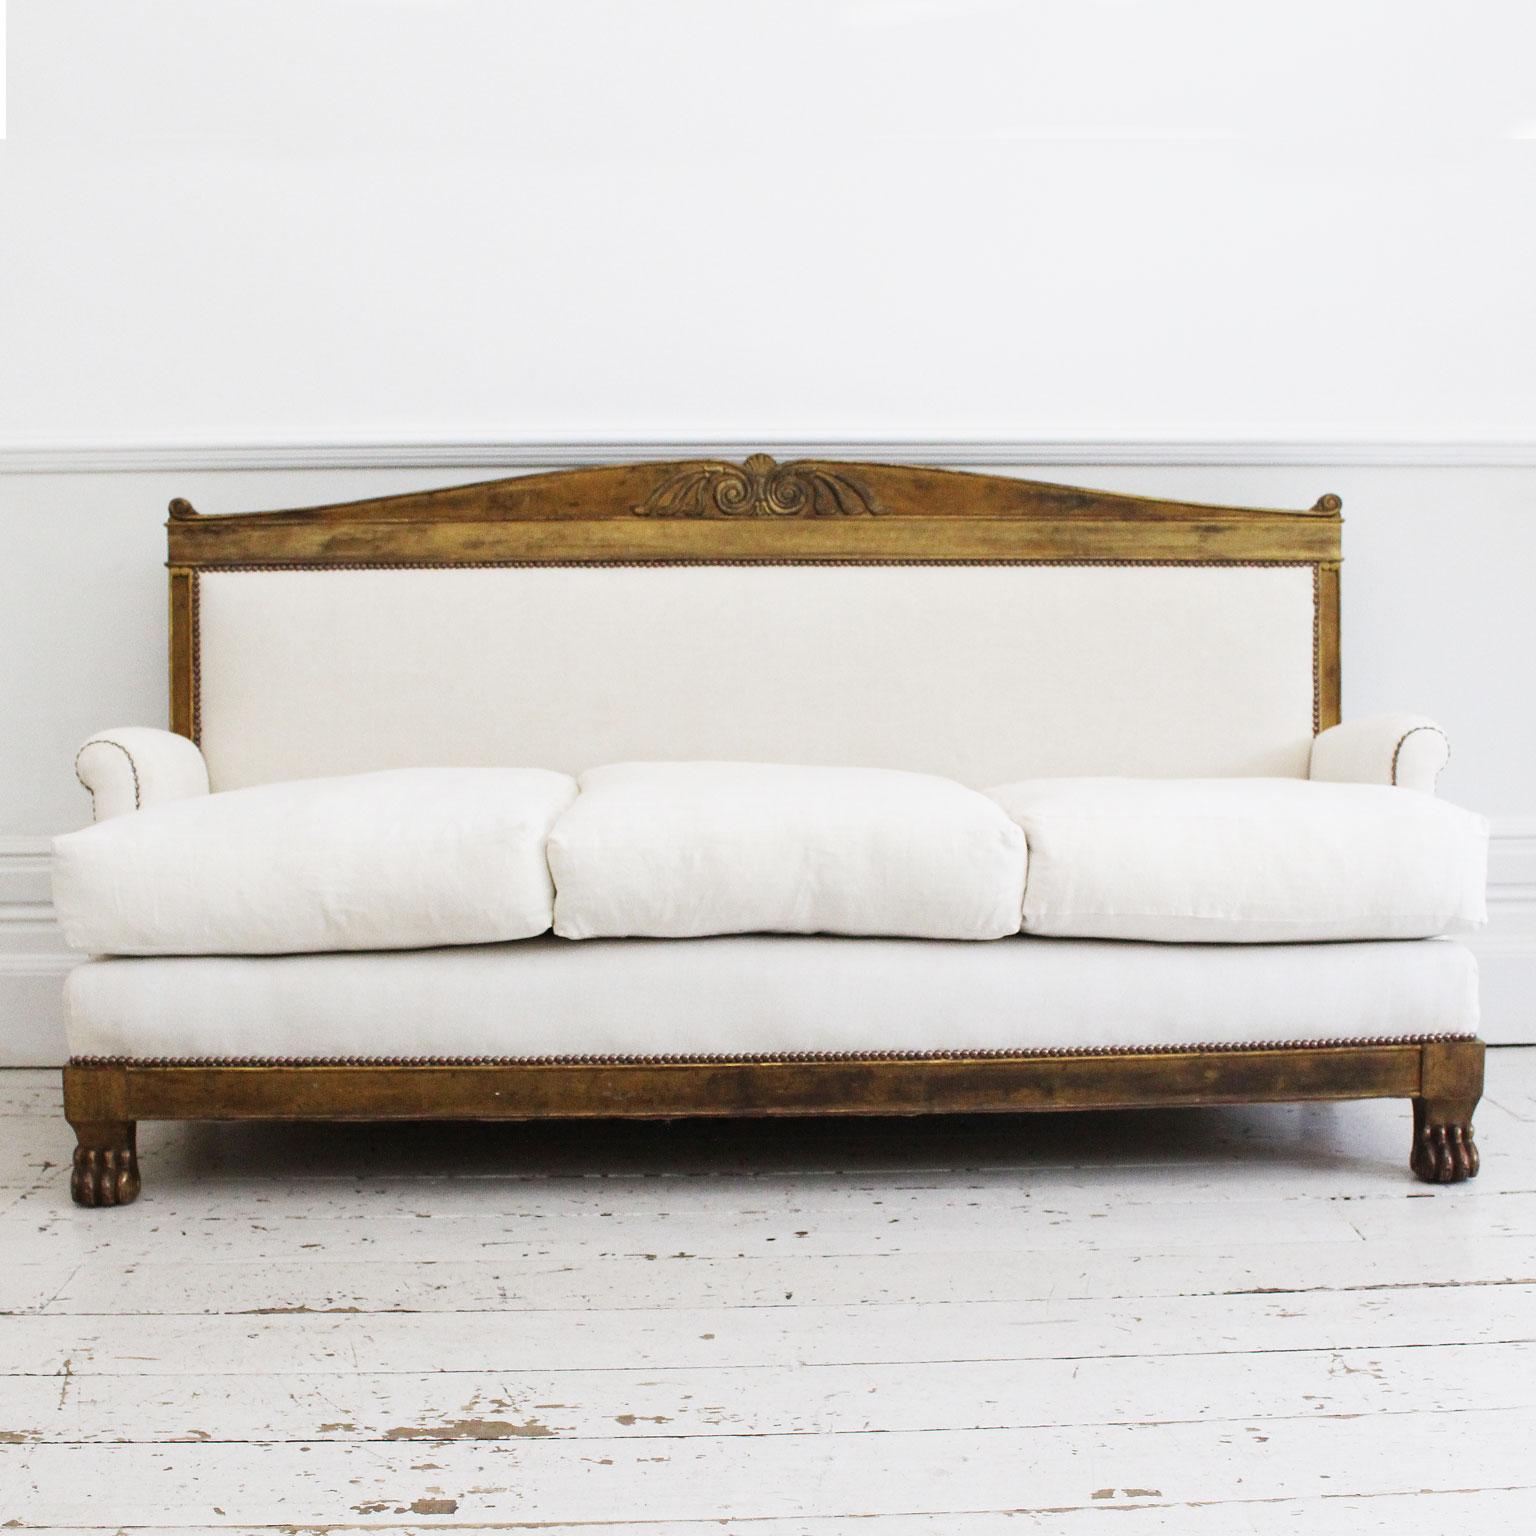 This grand gold gilt antique French sofa is in the Empire style, dating from the late 19th century. It has been newly upholstered in antique French linen, feather filled cushions and finished throughout with studs. We love claw feet detail.